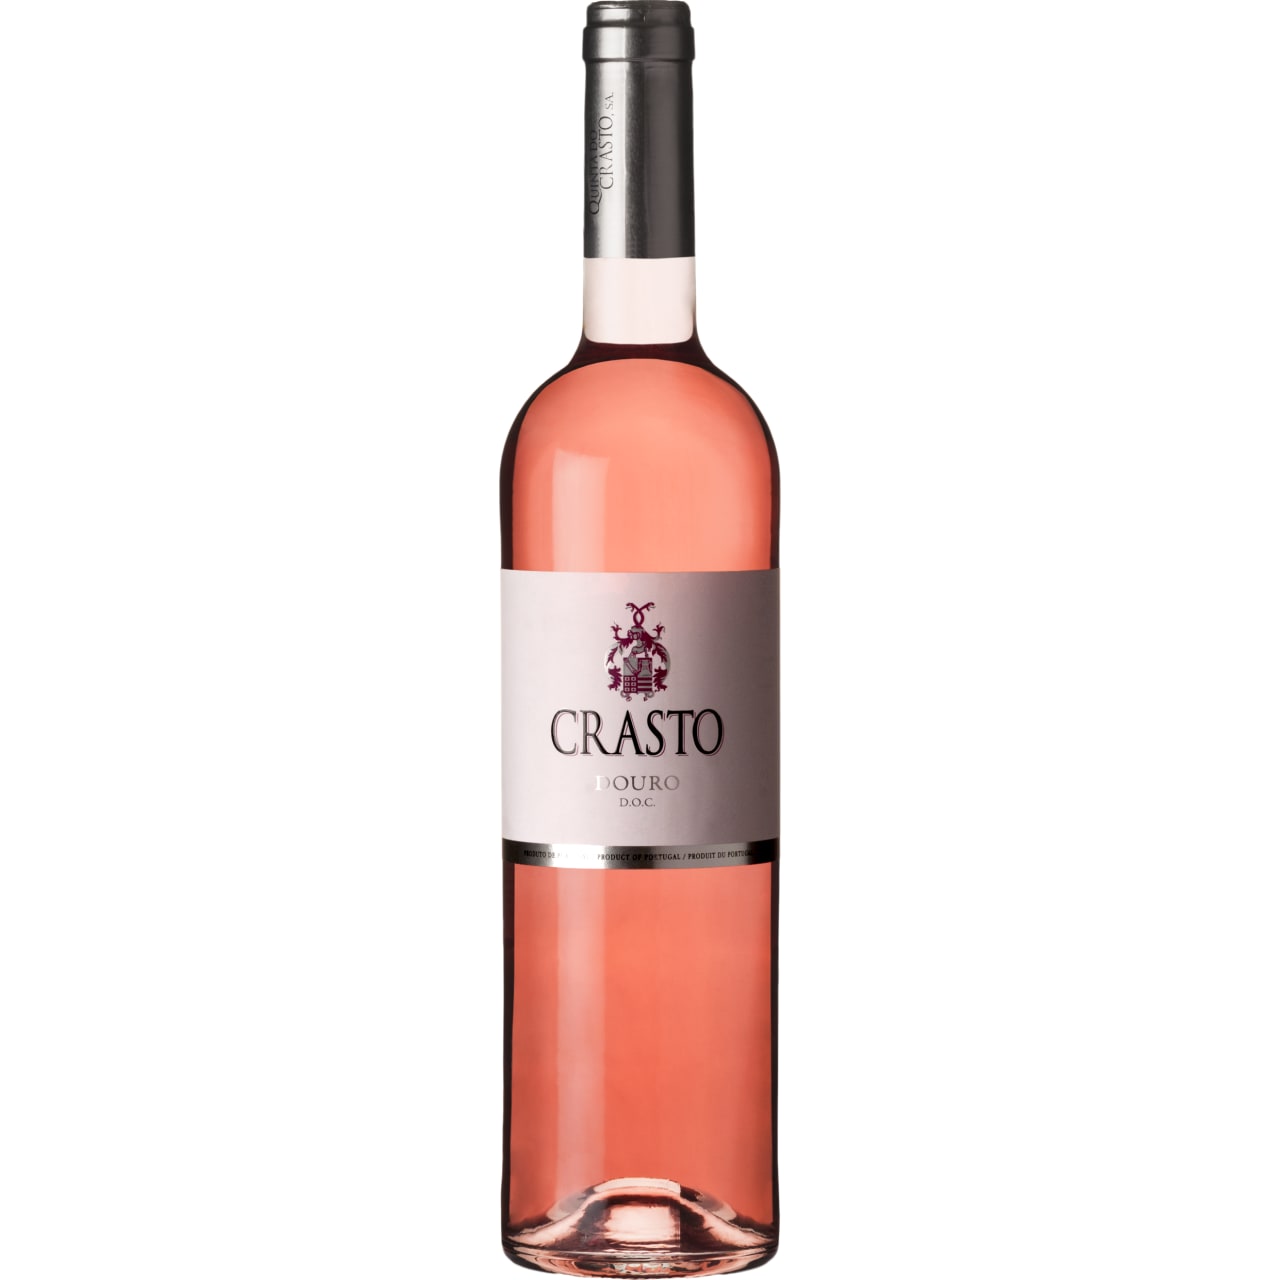 Bright salmon in colour, the wine delivers great aromatic freshness, with attractive notes of wild berry fruit nicely combined with elegant floral hints.